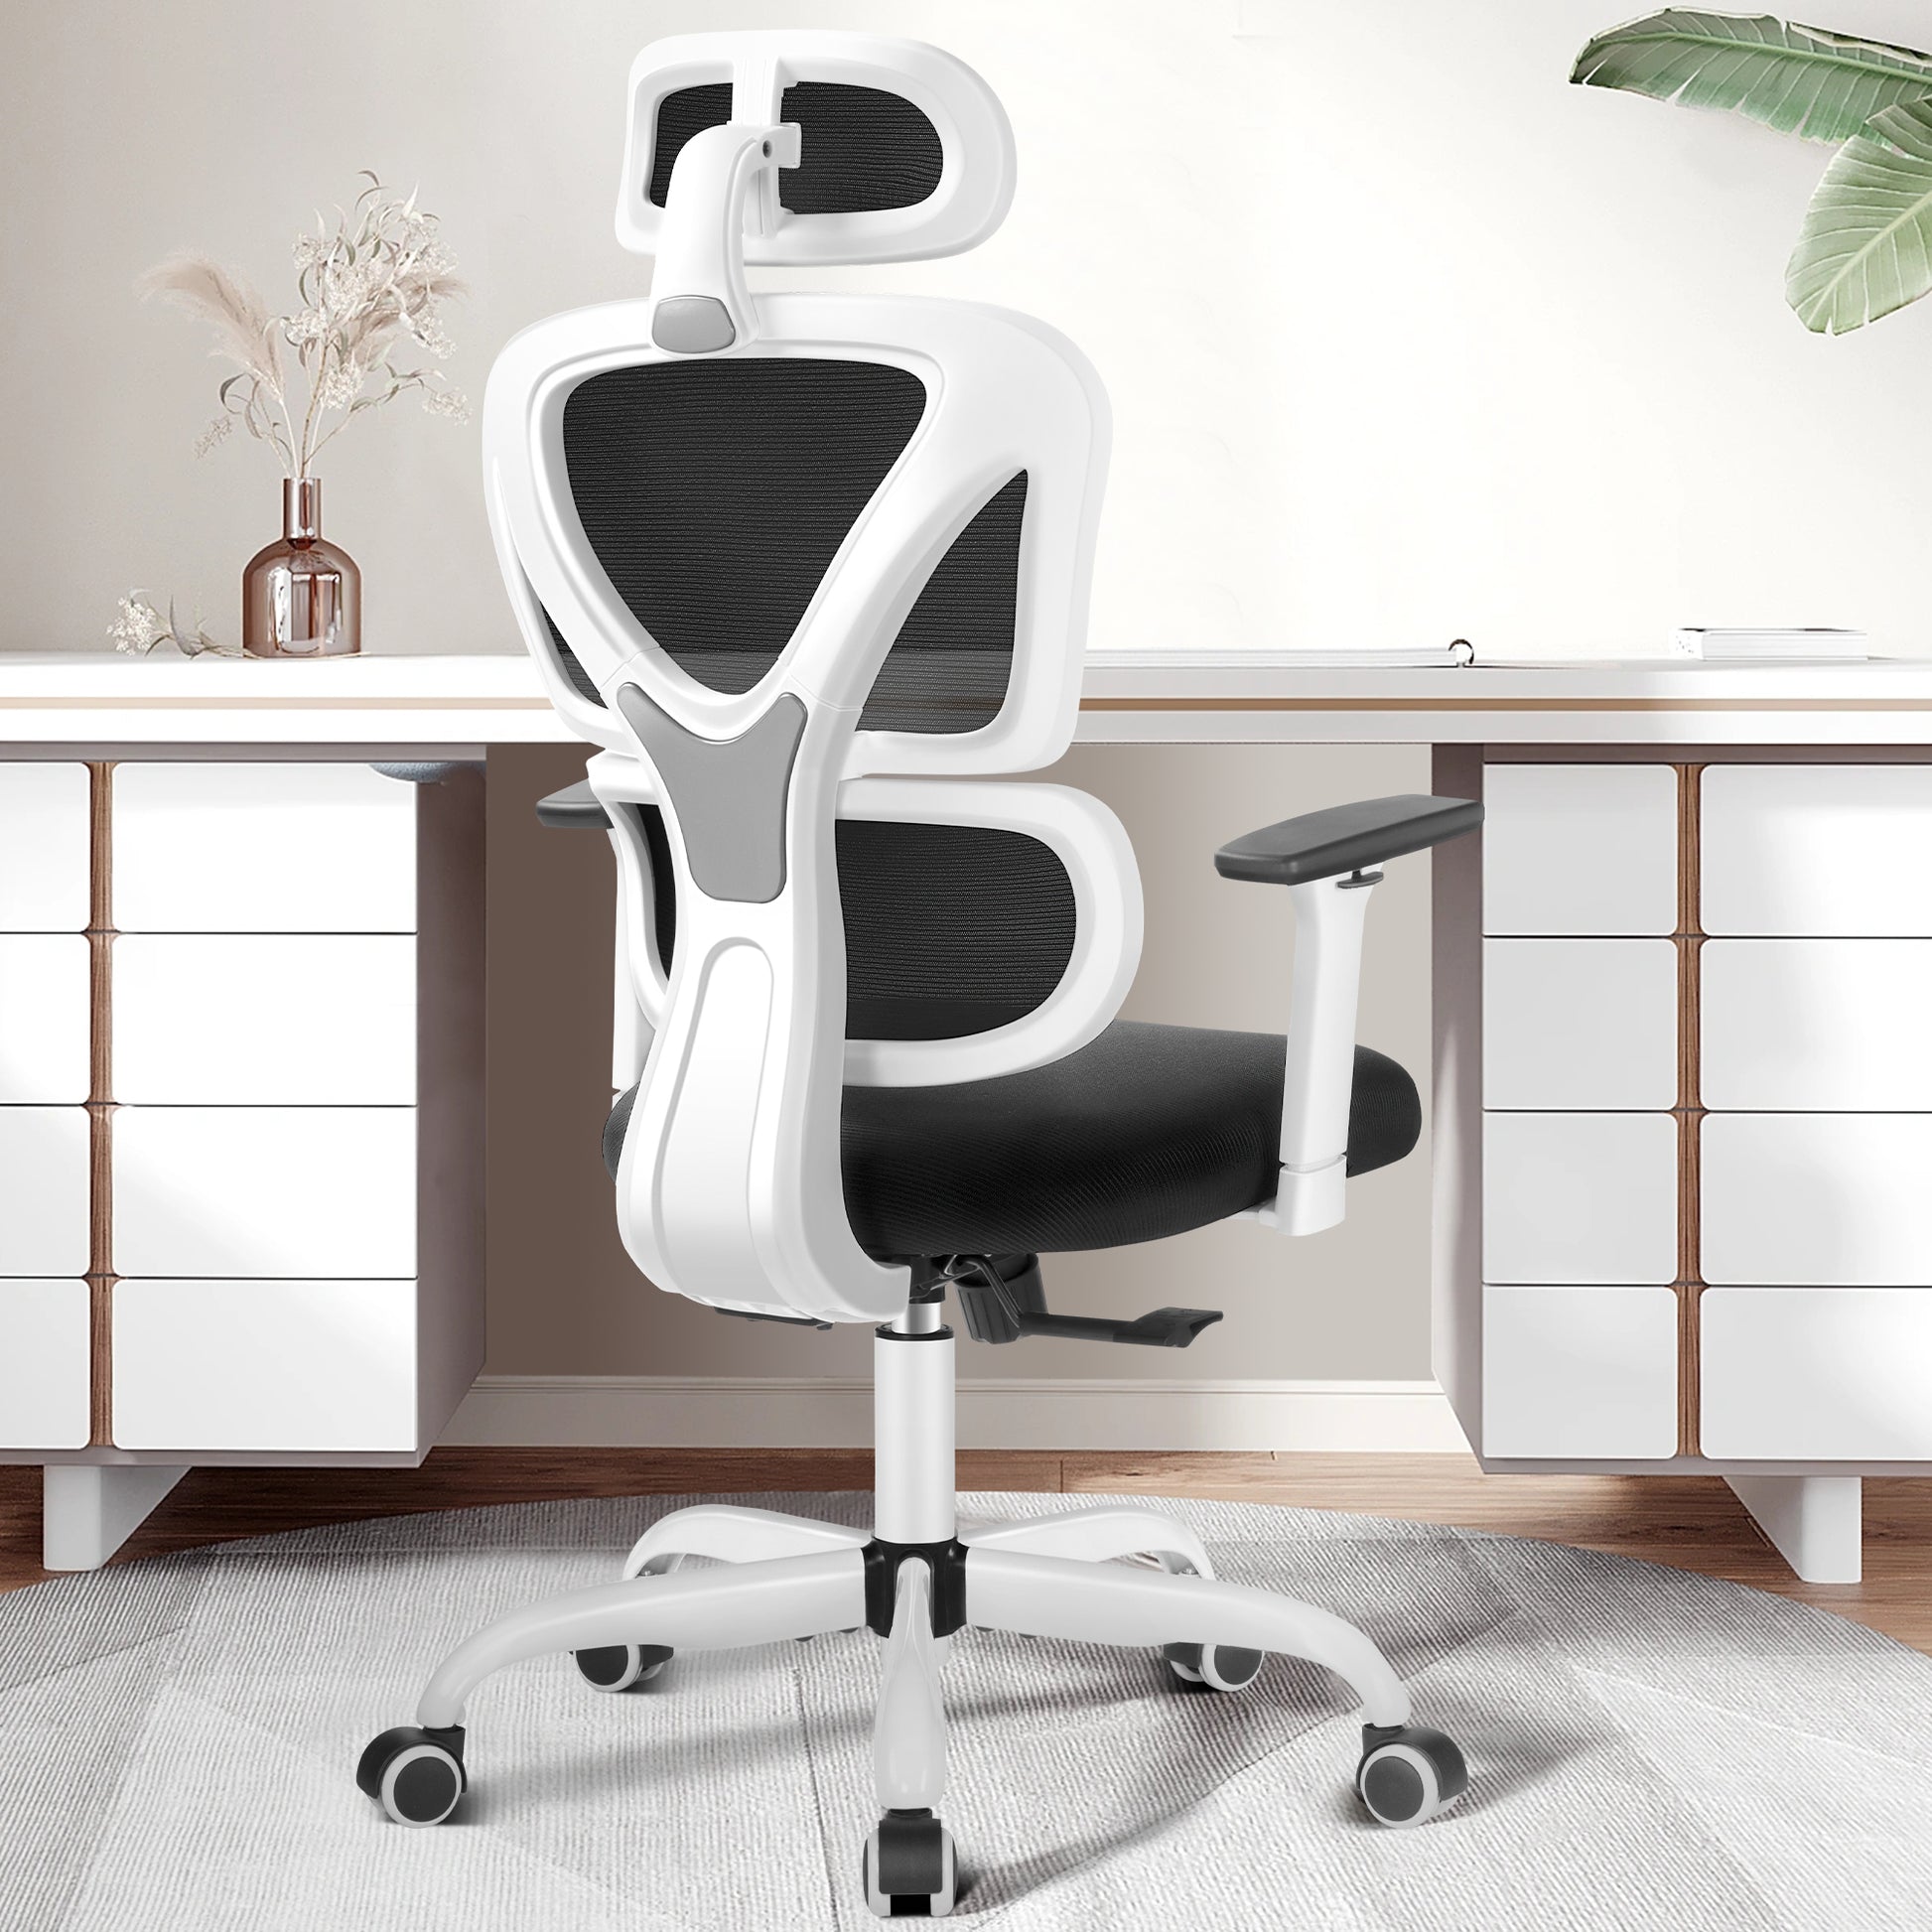 KERDOM High Back Ergonomic Office Chair with Lumbar Support